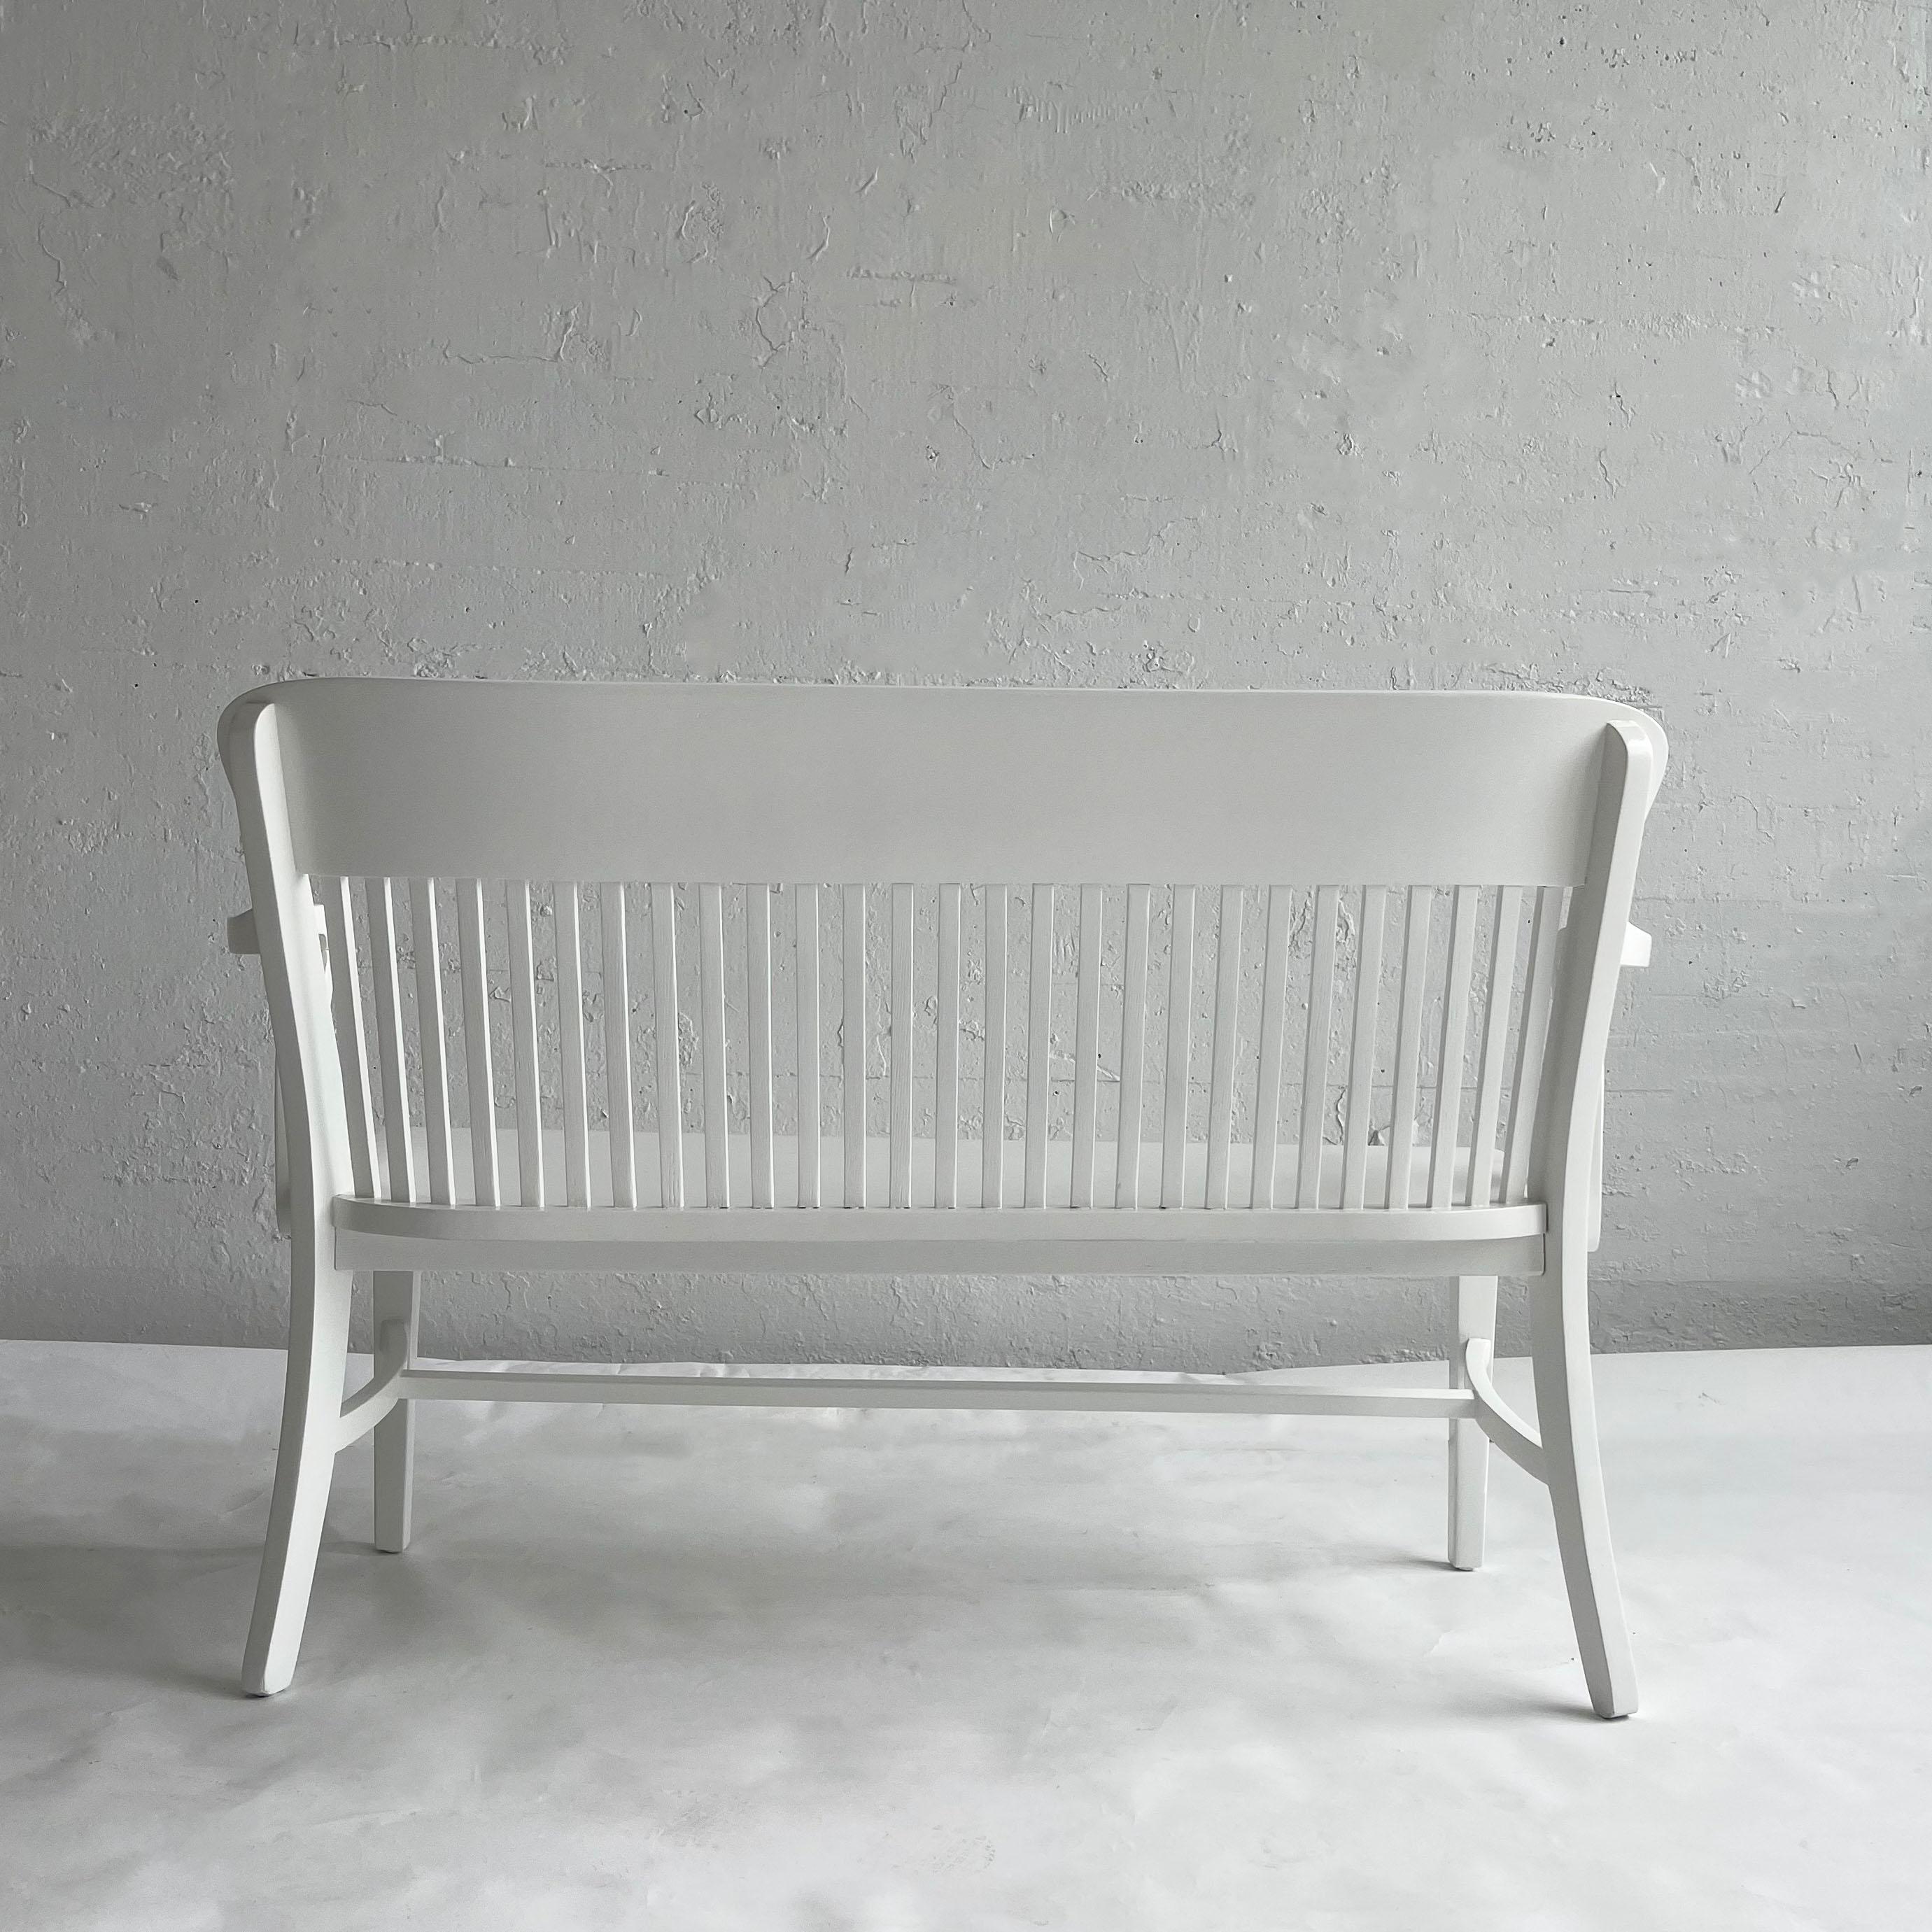 20th Century White Lacquered Industrial Oak Court Bench For Sale